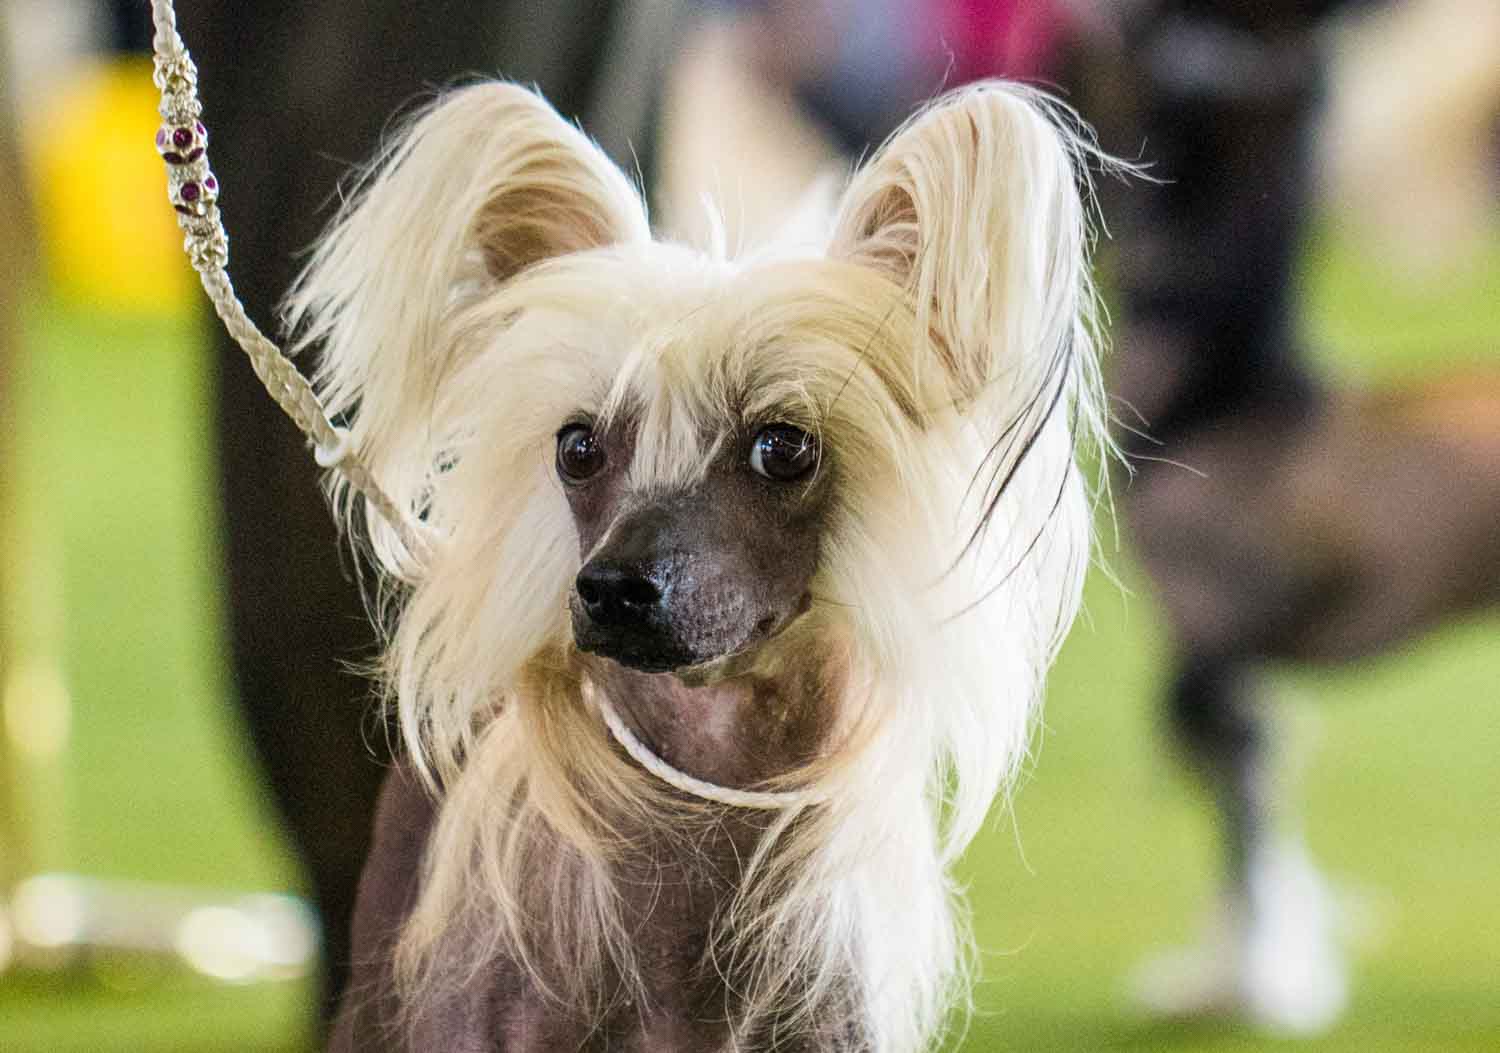 Chinese Crested (Photo: Natalie Siebers)